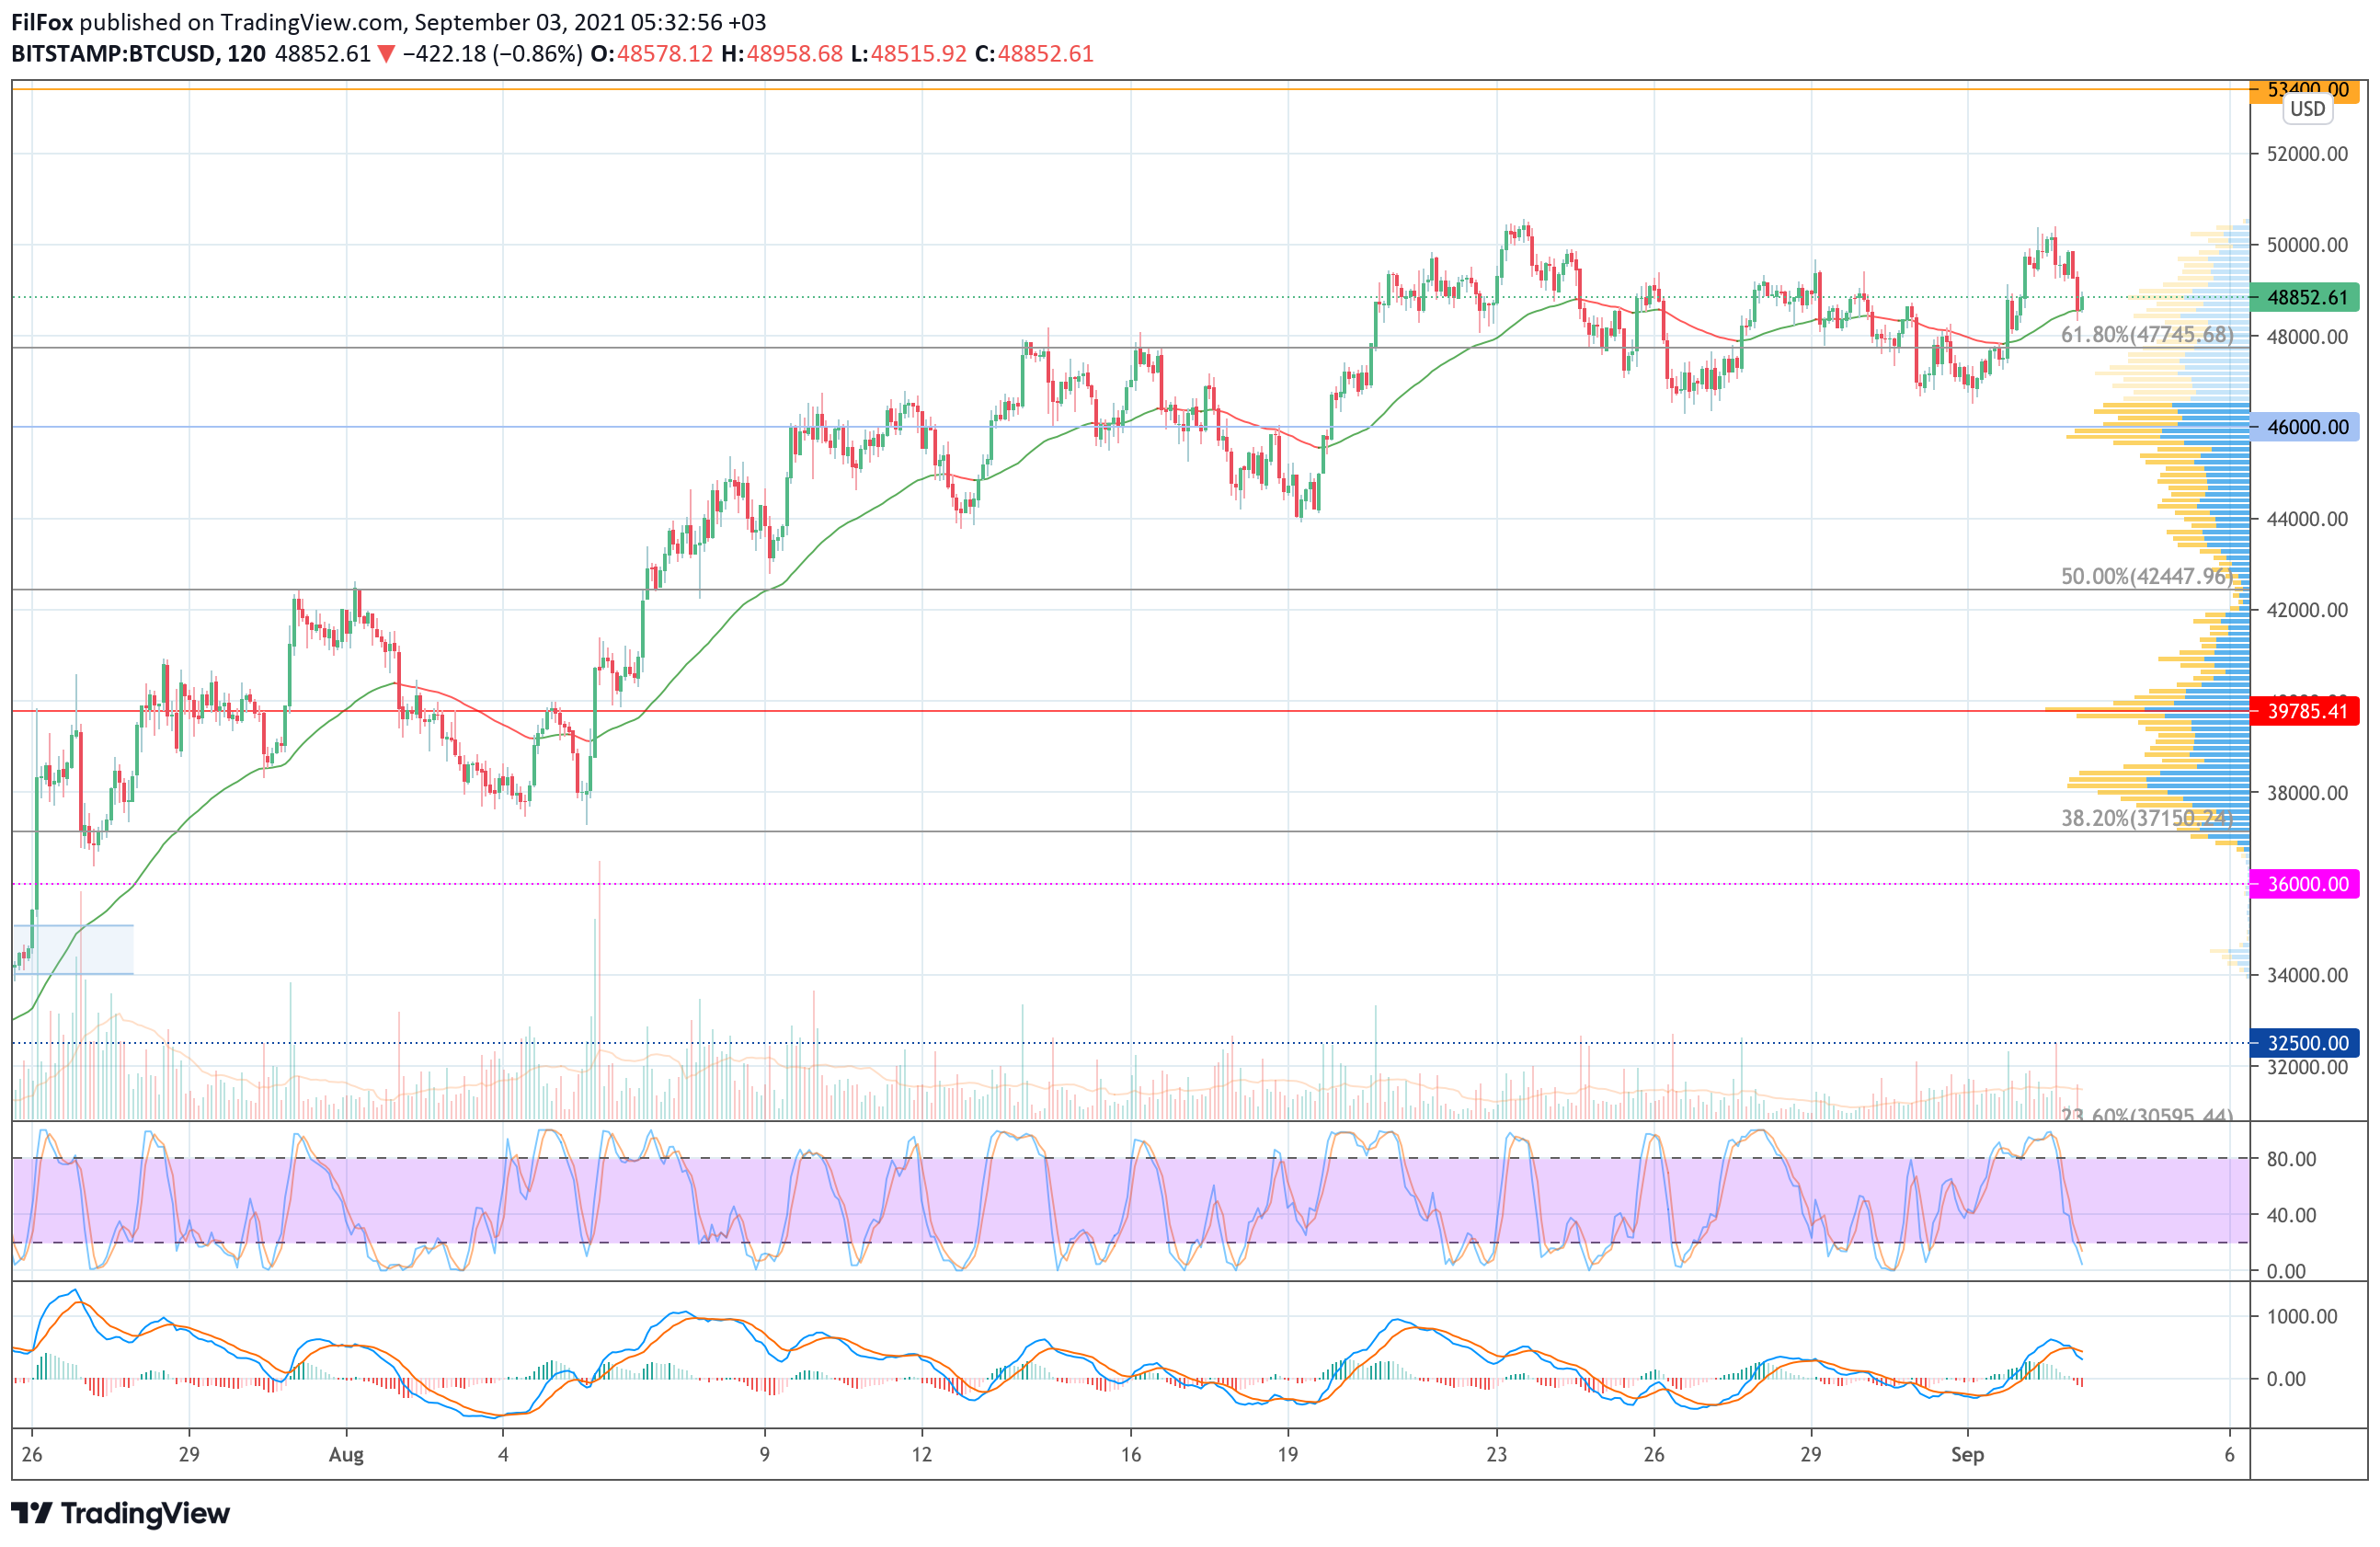 Analysis of the prices of Bitcoin, Ethereum, XRP for 09/03/2021